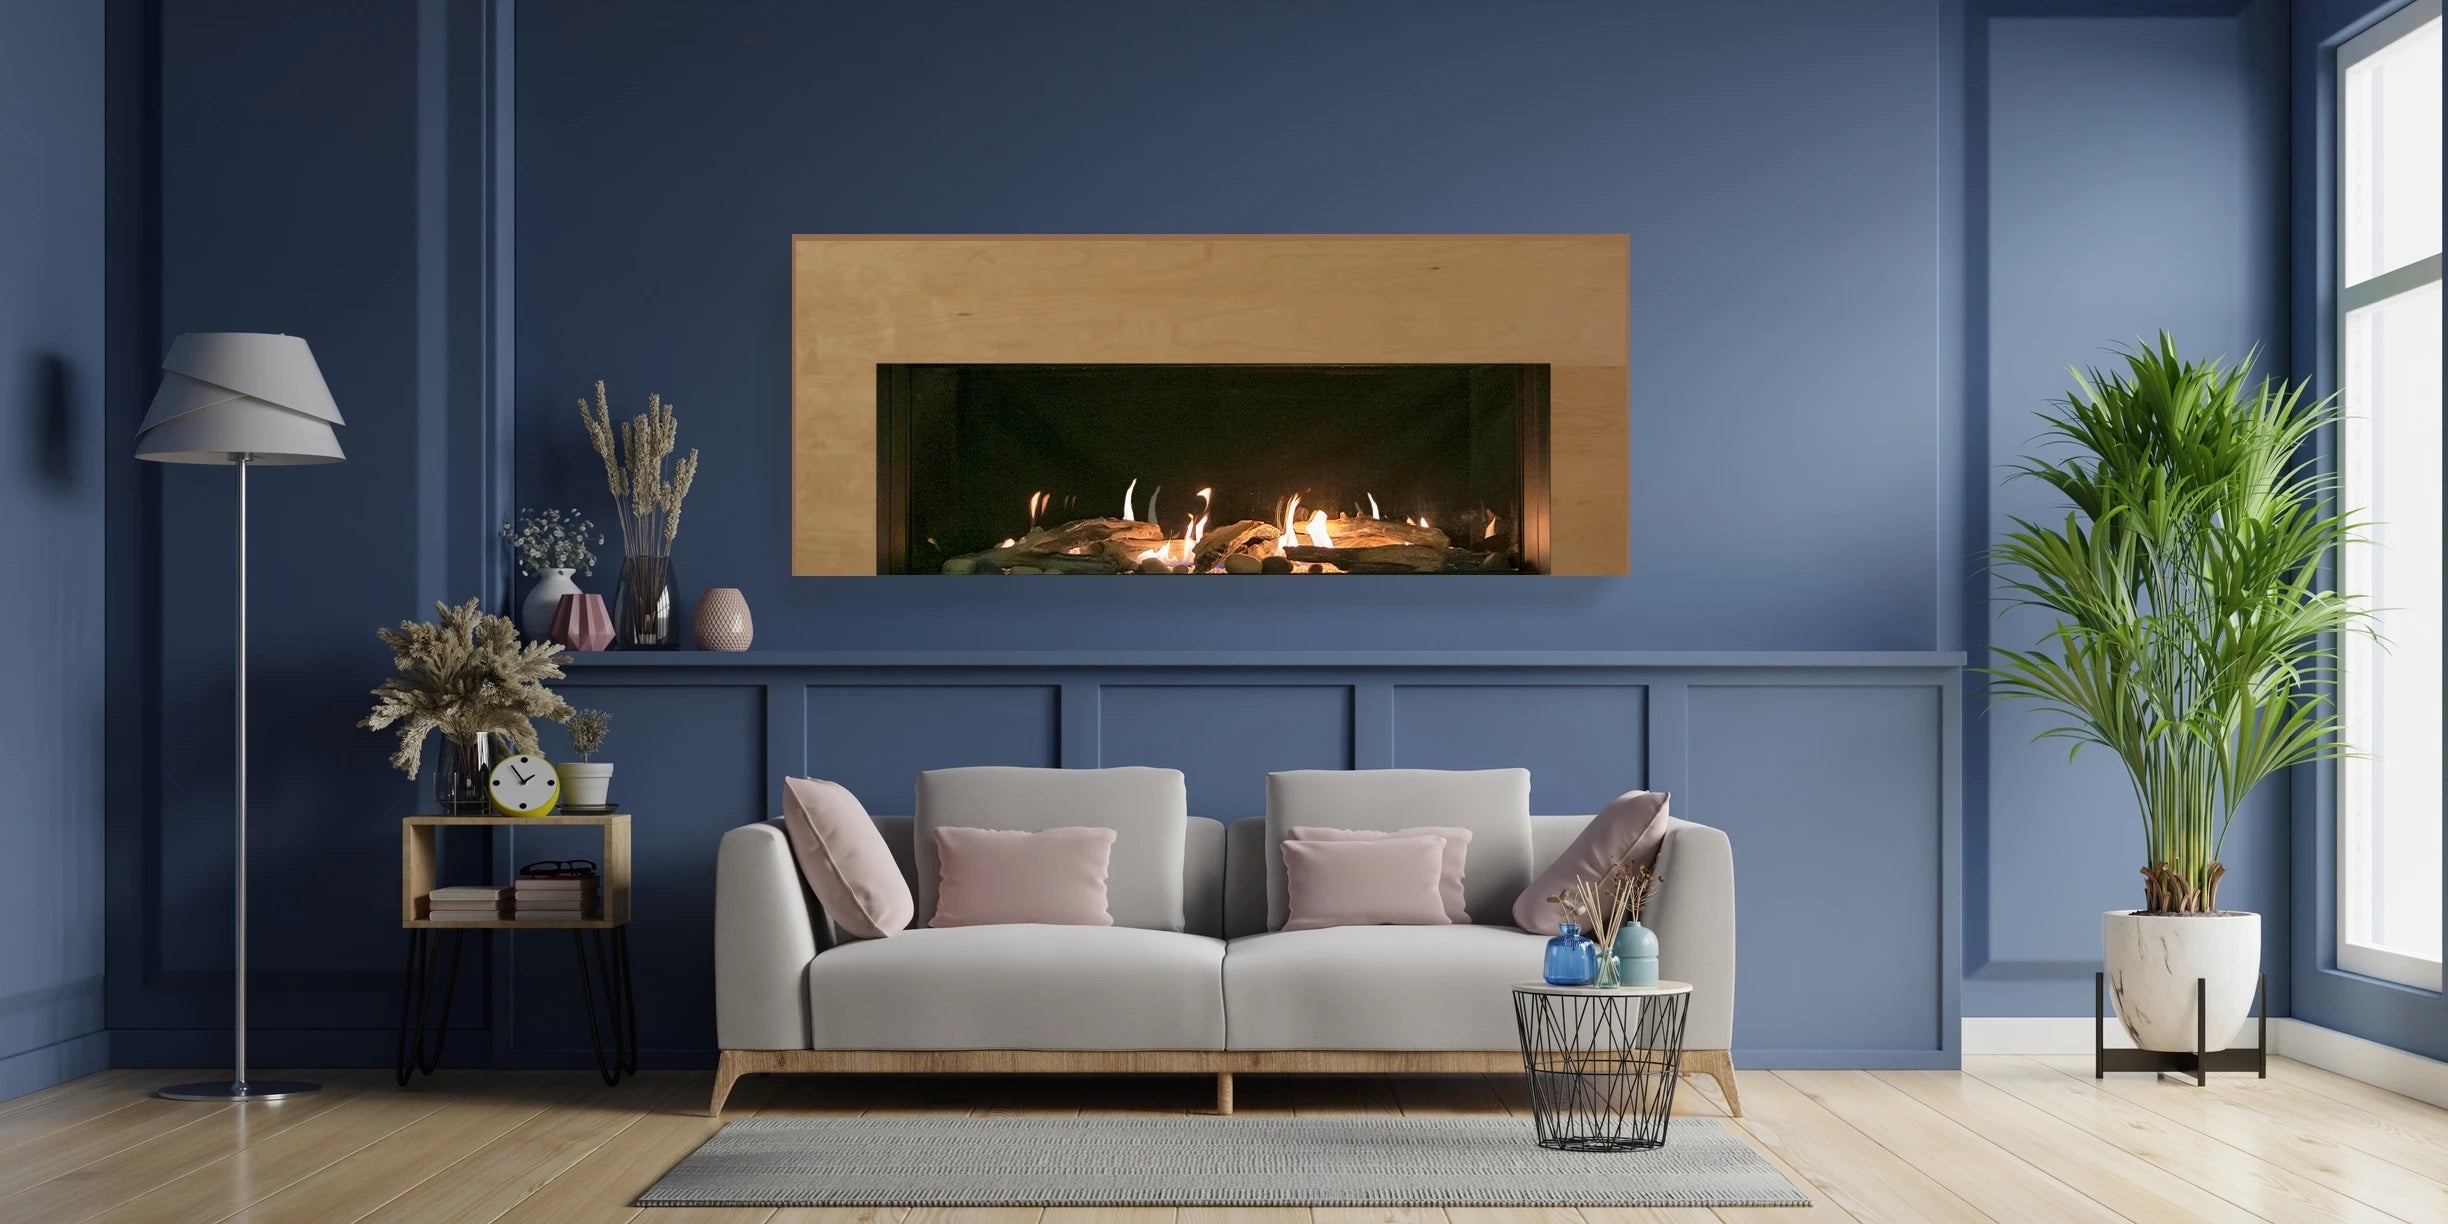 Sierra Flame Vienna Direct Vent Linear Gas Fireplace - Natural Gas or Liquid Propane- Lifestyle Living Room